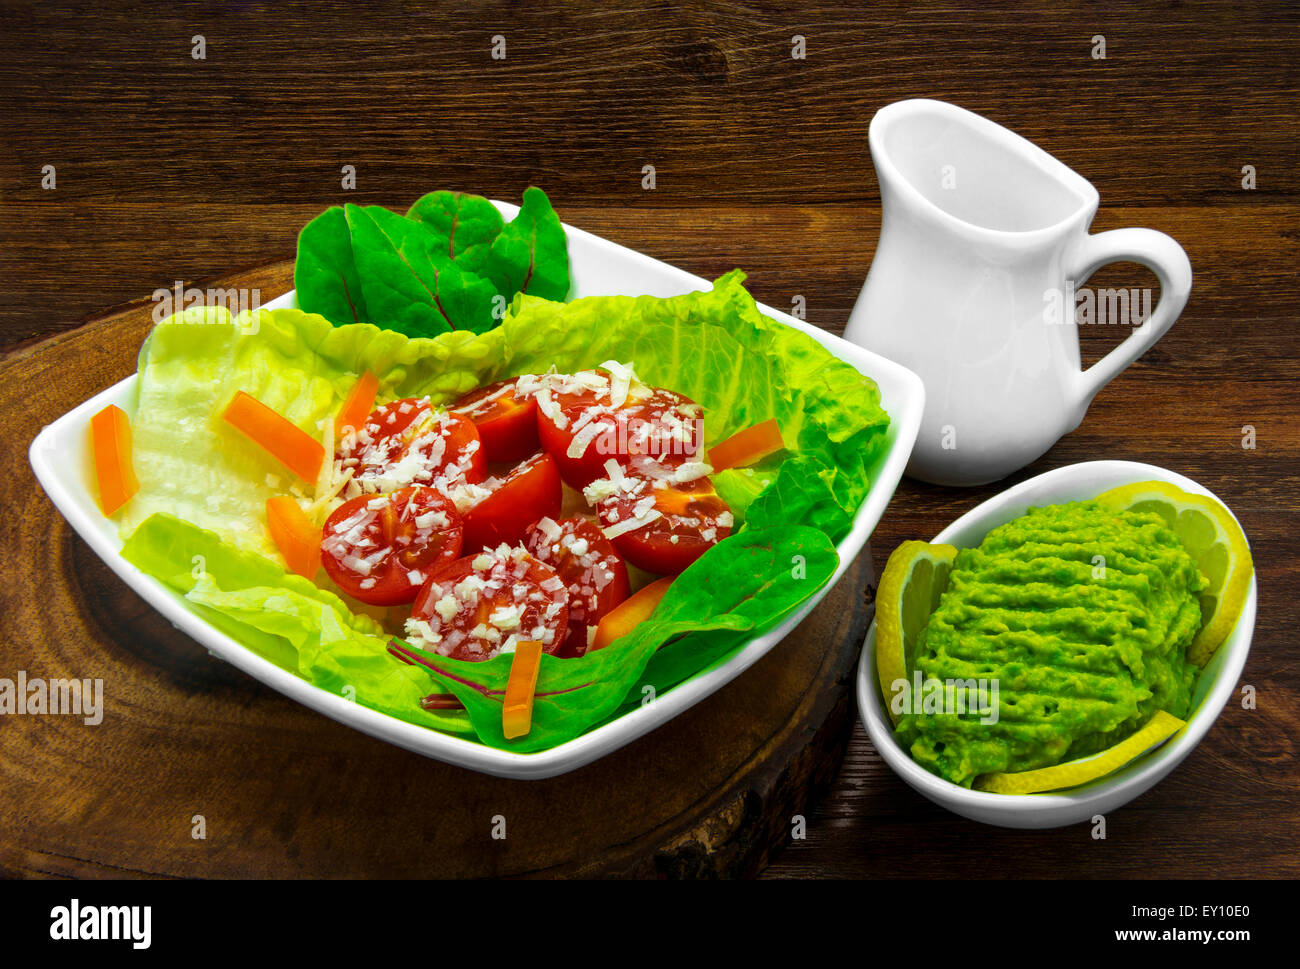 Fresh salad, avocado with lemon and green beans. Wooden background. Stock Photo